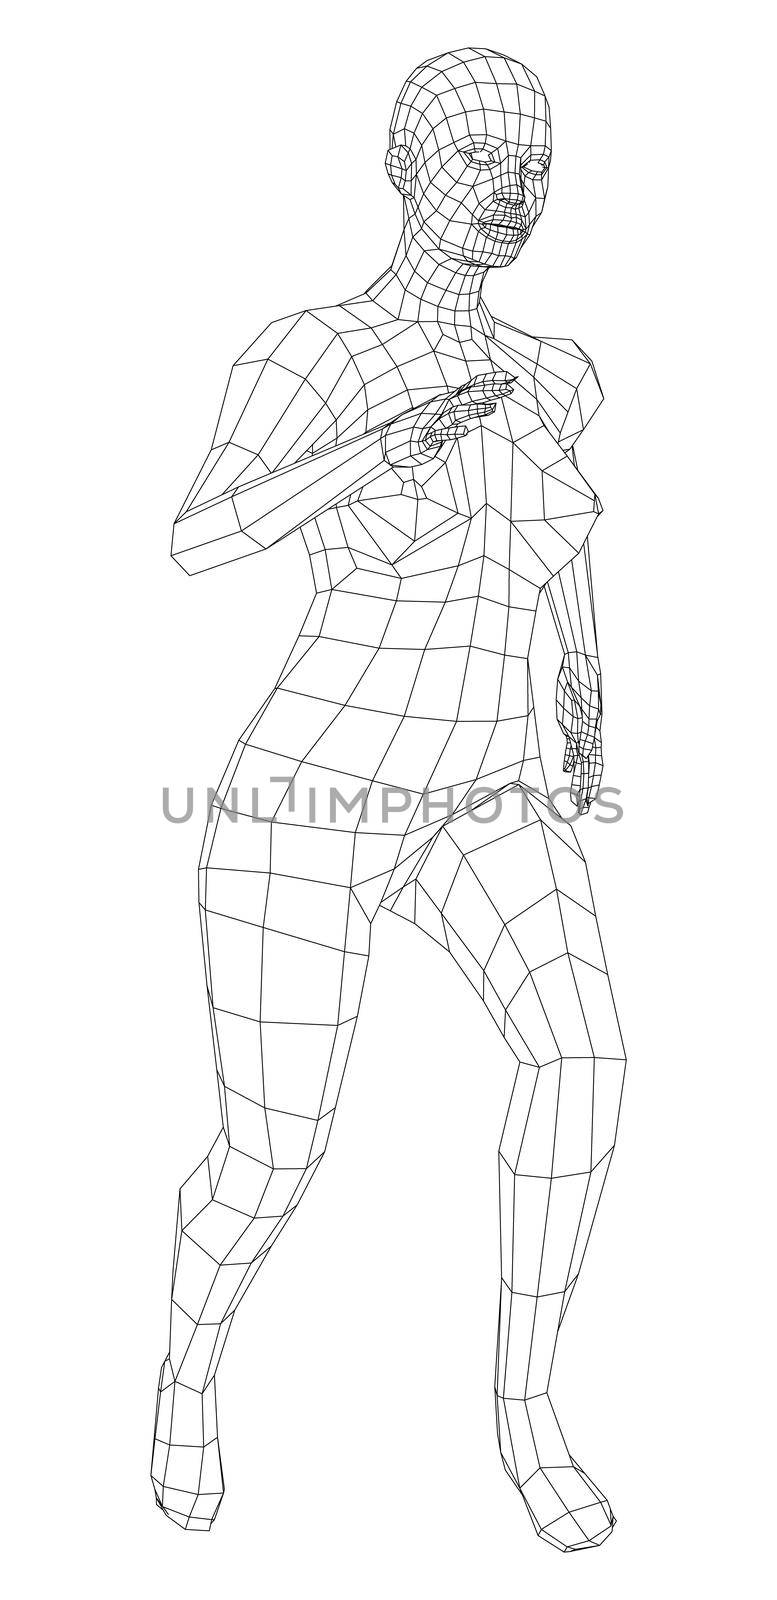 Wireframe running woman. 3d illustration. Woman in running pose